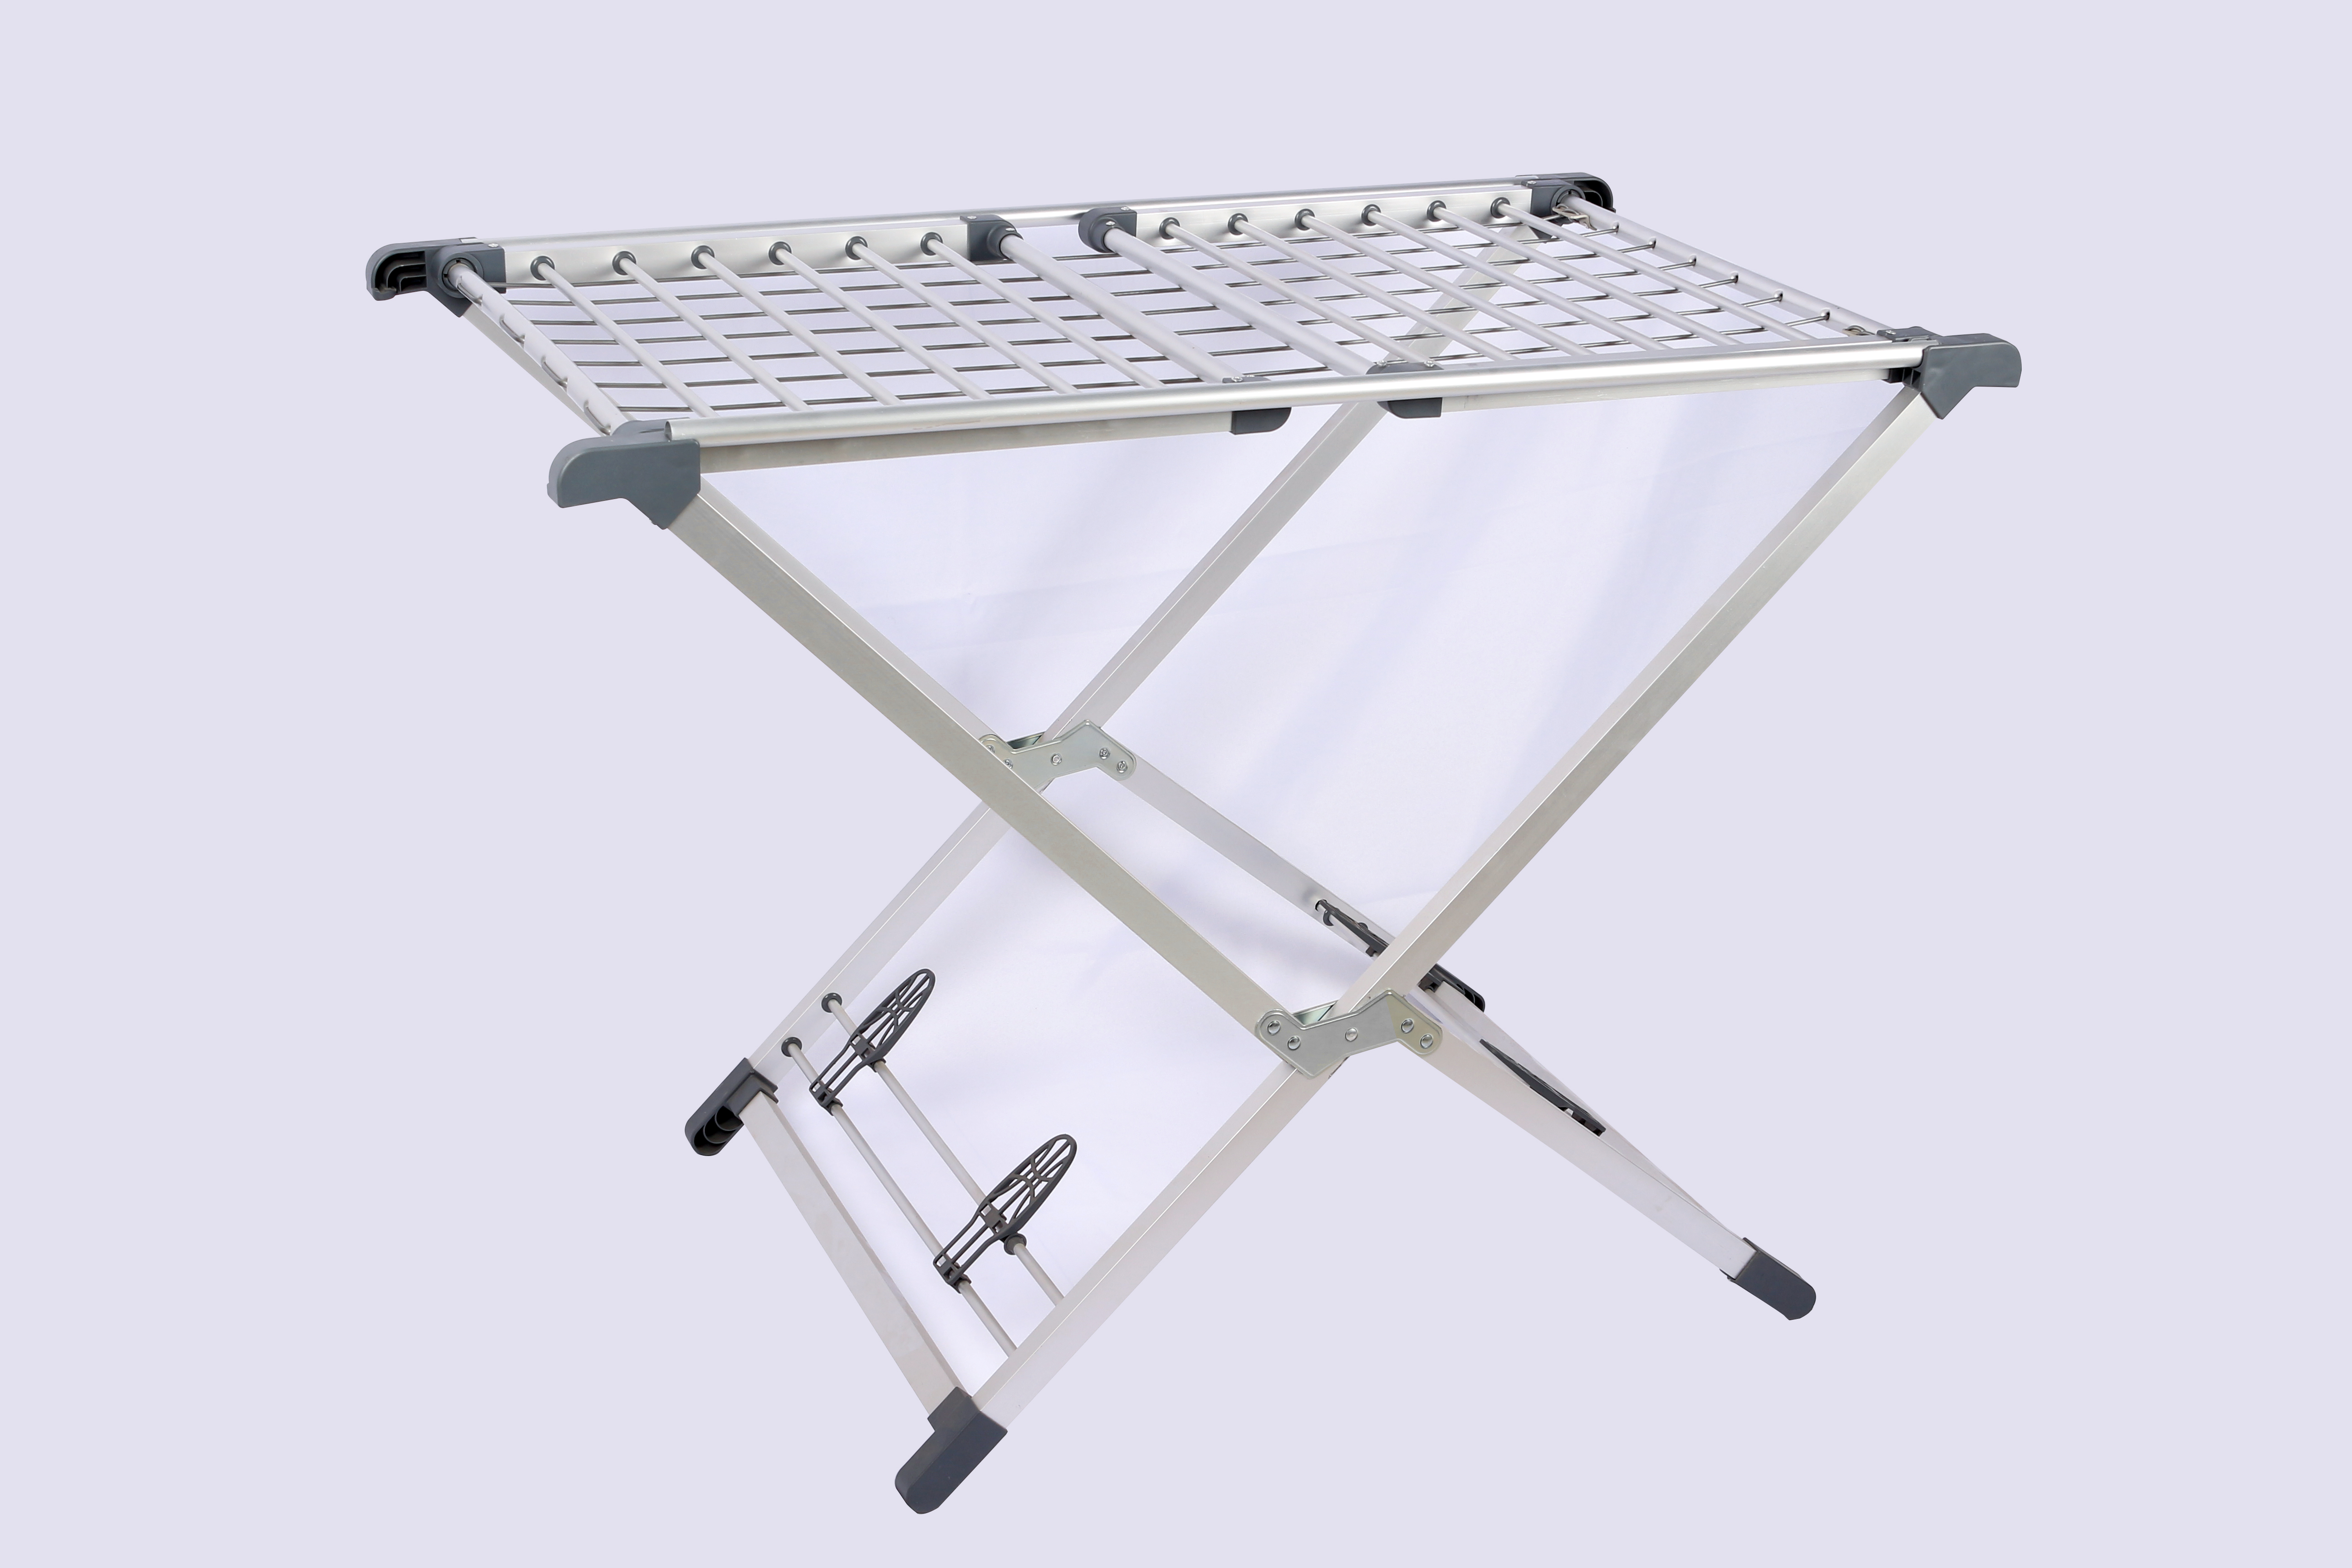 Stainless Steel Foldable Accordion Drying Rack